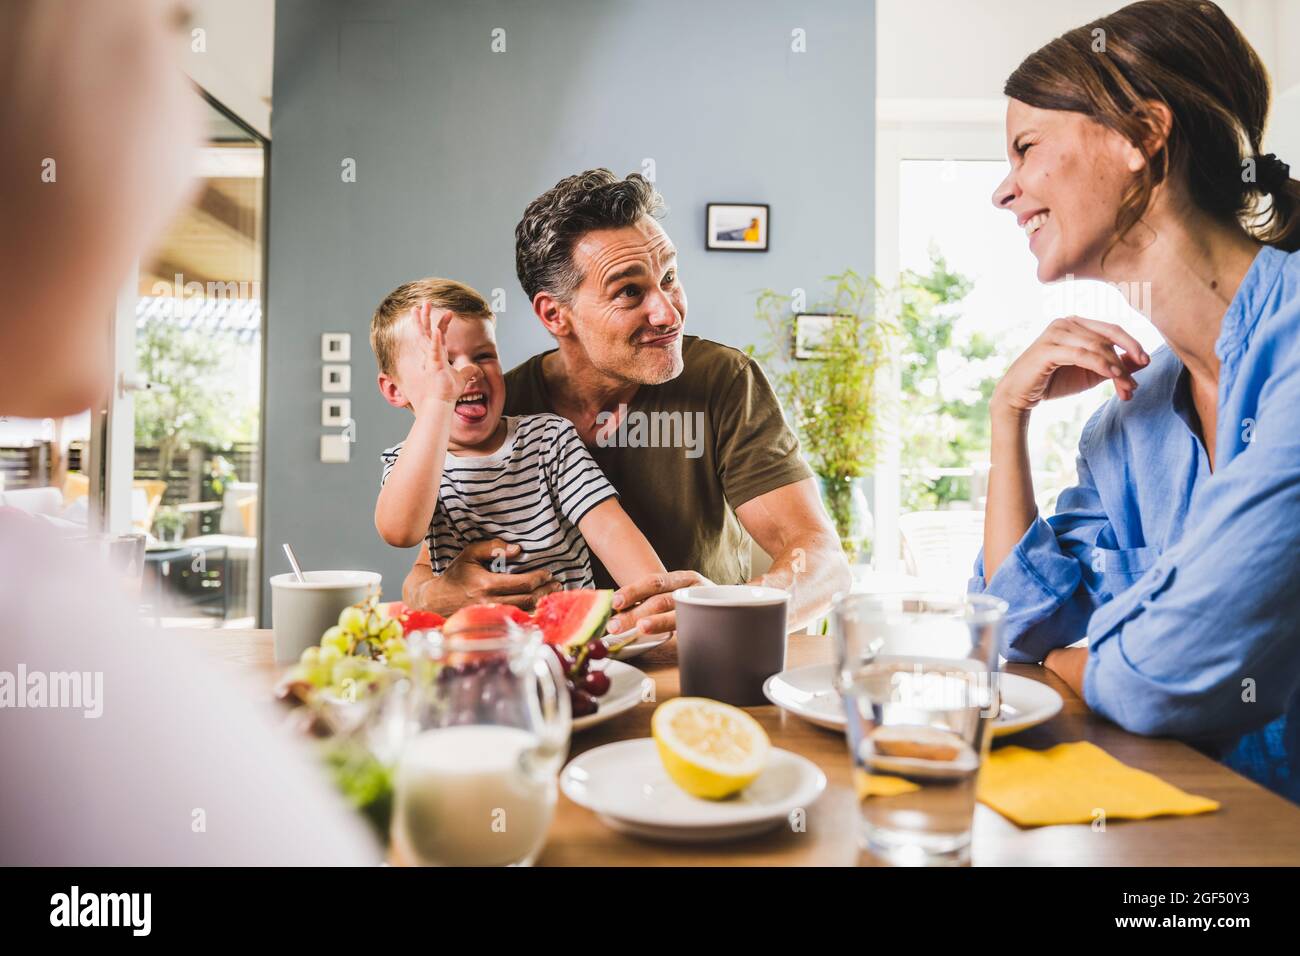 Playful father and son teasing woman while having breakfast at home Stock Photo